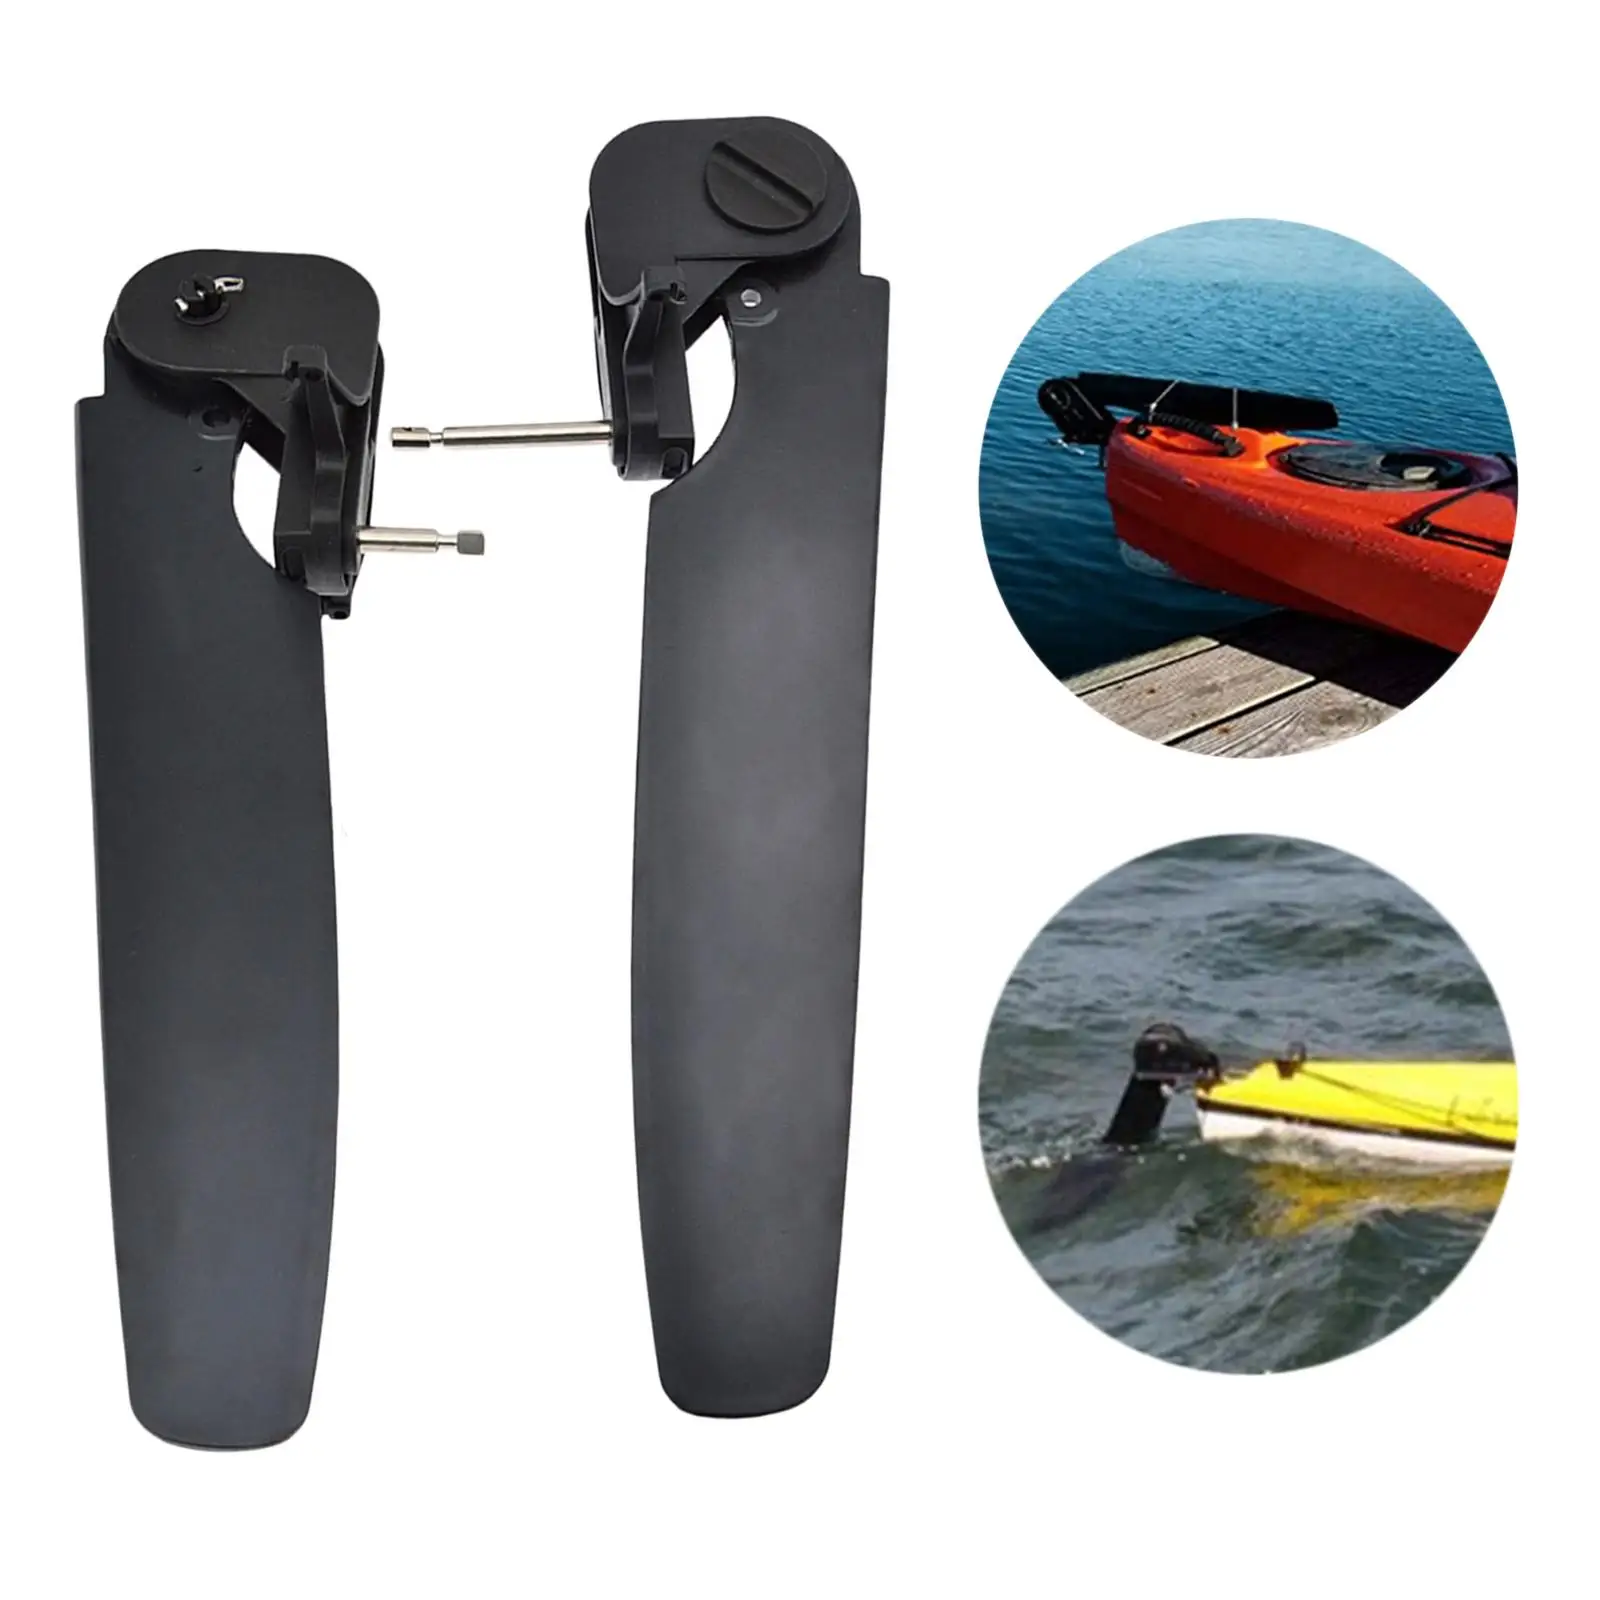 Canoe Kayak Boat Rudder Steering System Fixation Direction Foot Control